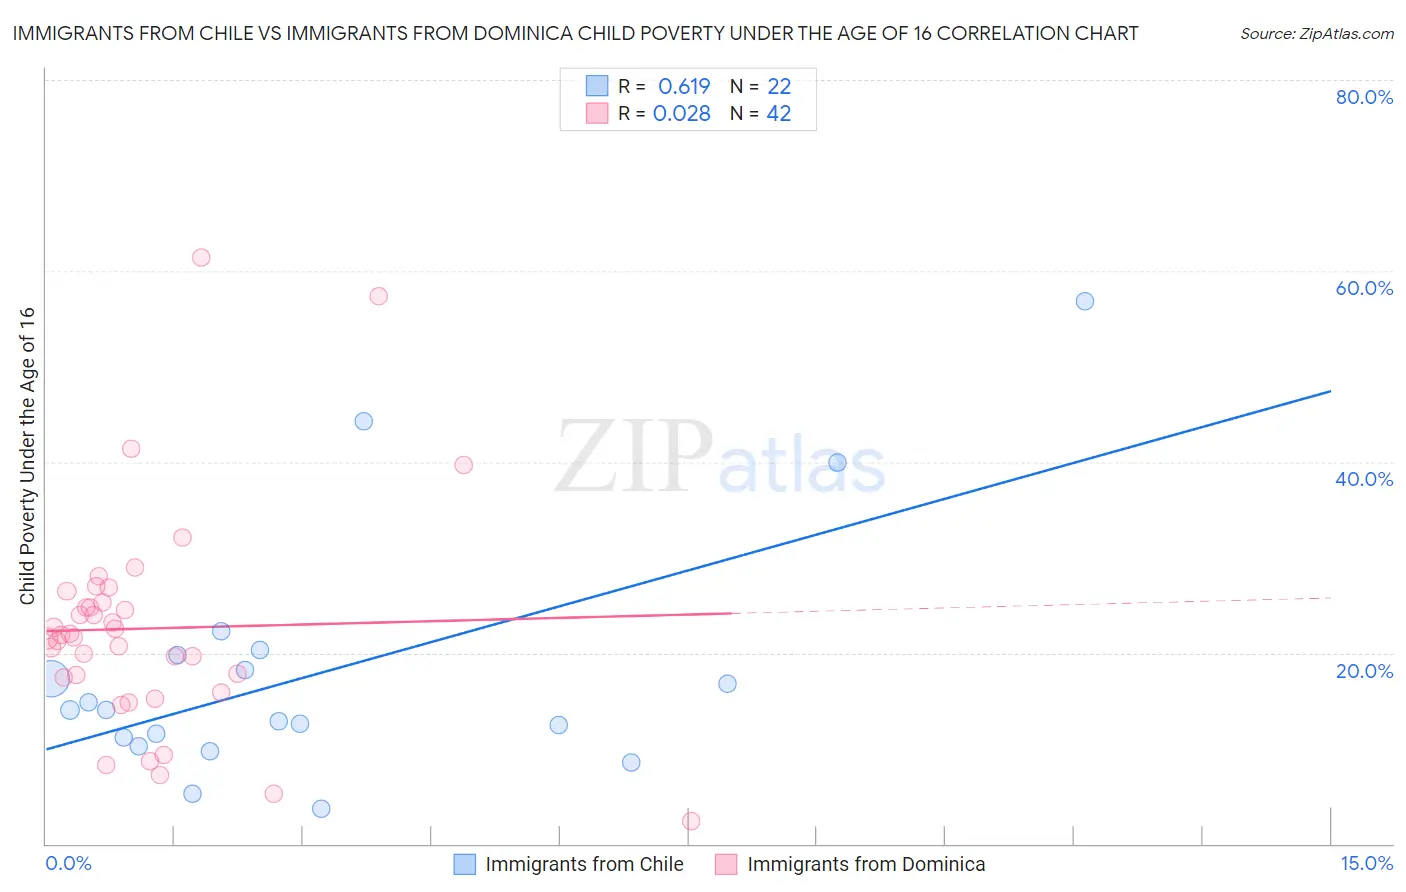 Immigrants from Chile vs Immigrants from Dominica Child Poverty Under the Age of 16